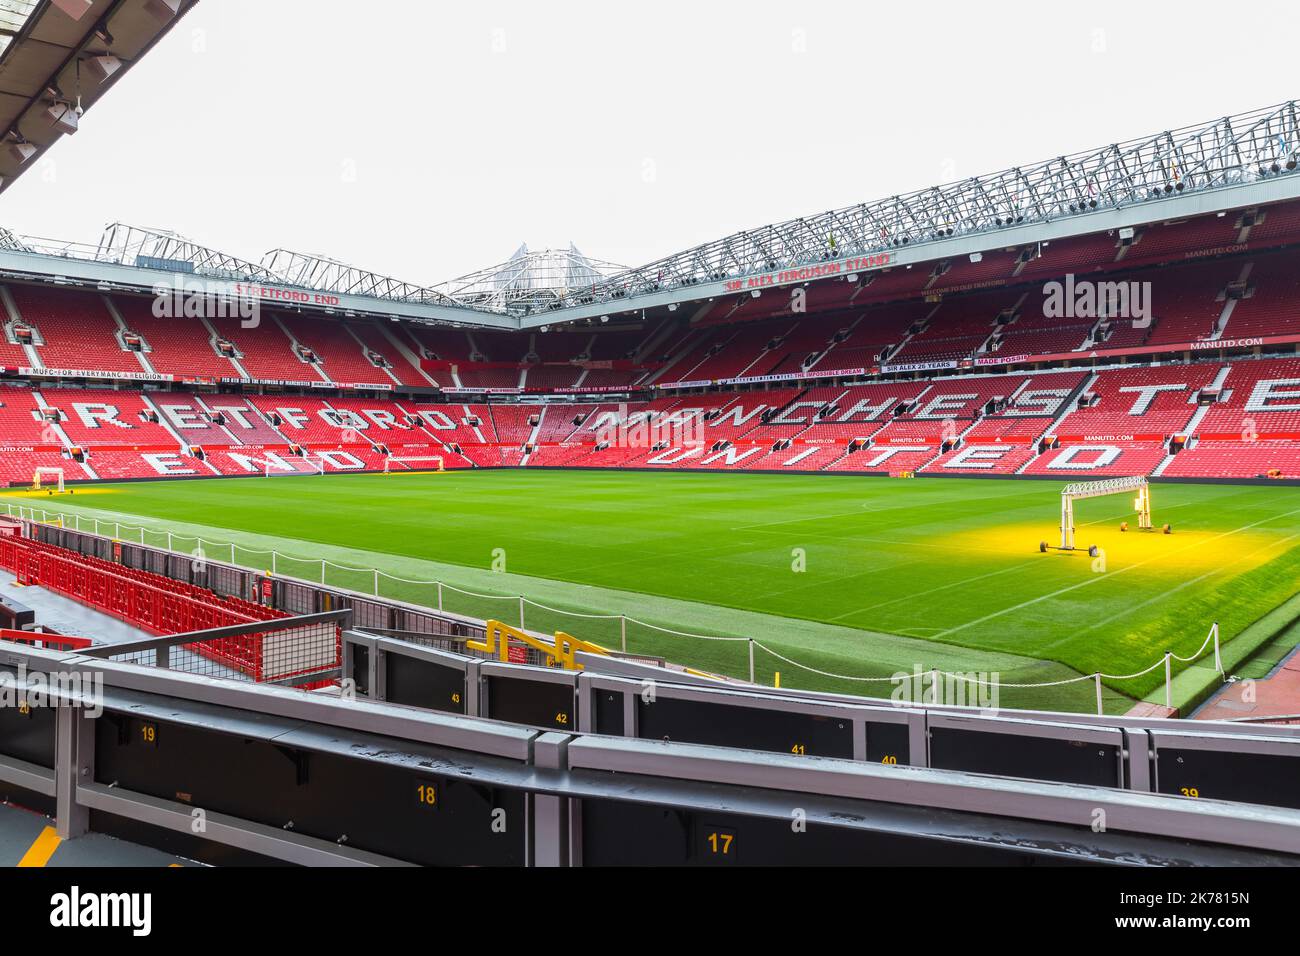 The pitch at Manchester United's Old Trafford stadium Stock Photo